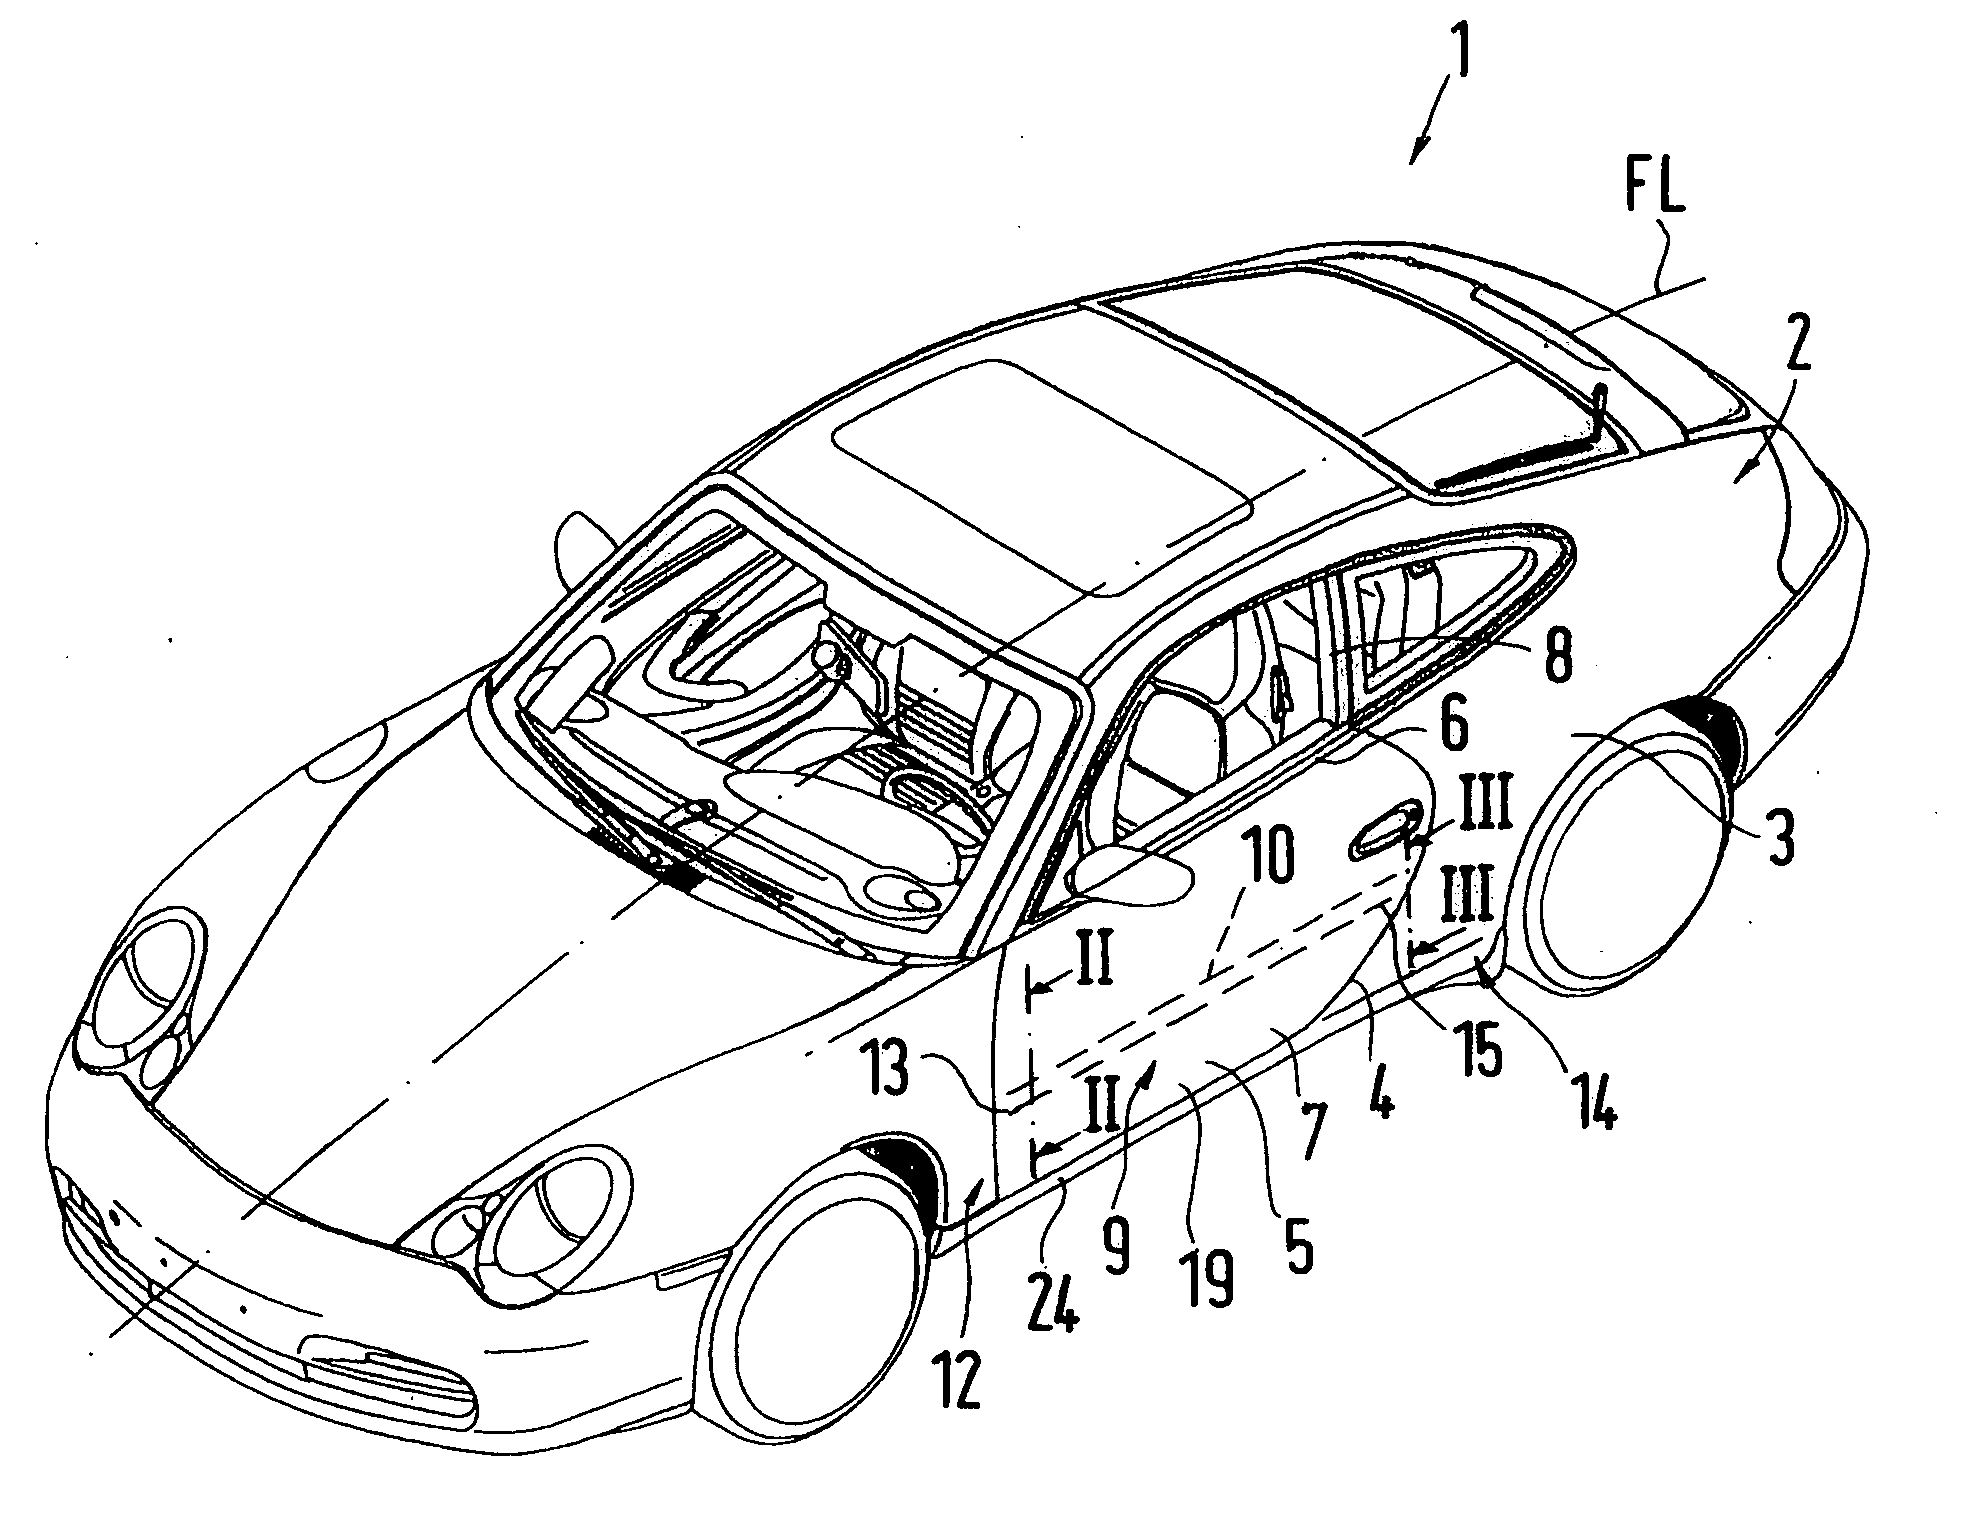 Motor vehicle door with a lateral impact protection device